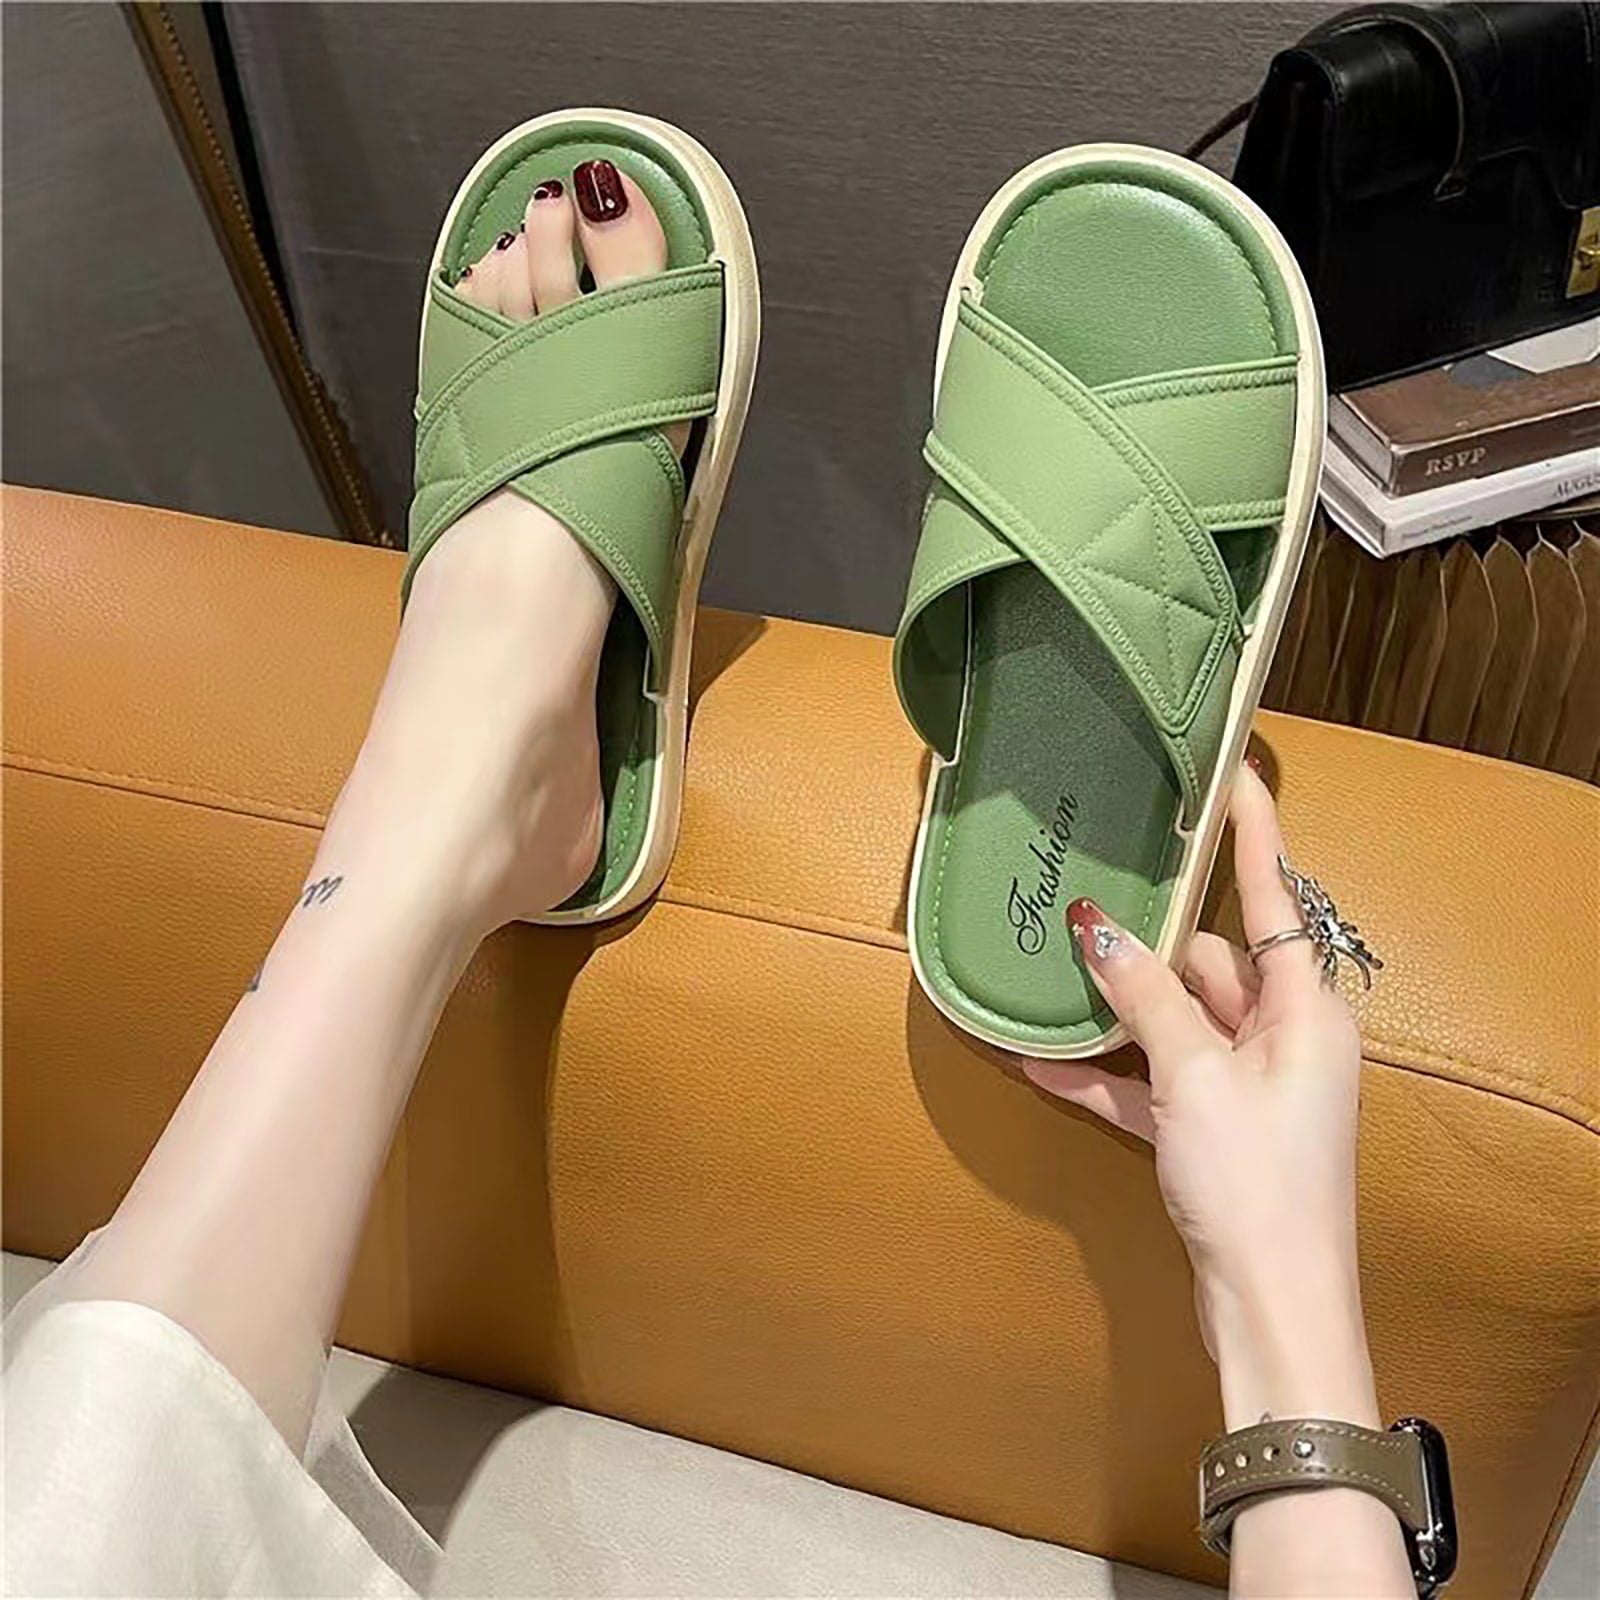 New Arrival Simple, Elegant And Versatile Slippers With Soft Pvc Outsole For Anti-Slip On The Beach And In Home Bathroom - Suitable For Indoor And Outdoor Wear, Giving You A Chic And Fresh Ins Look-Green-8